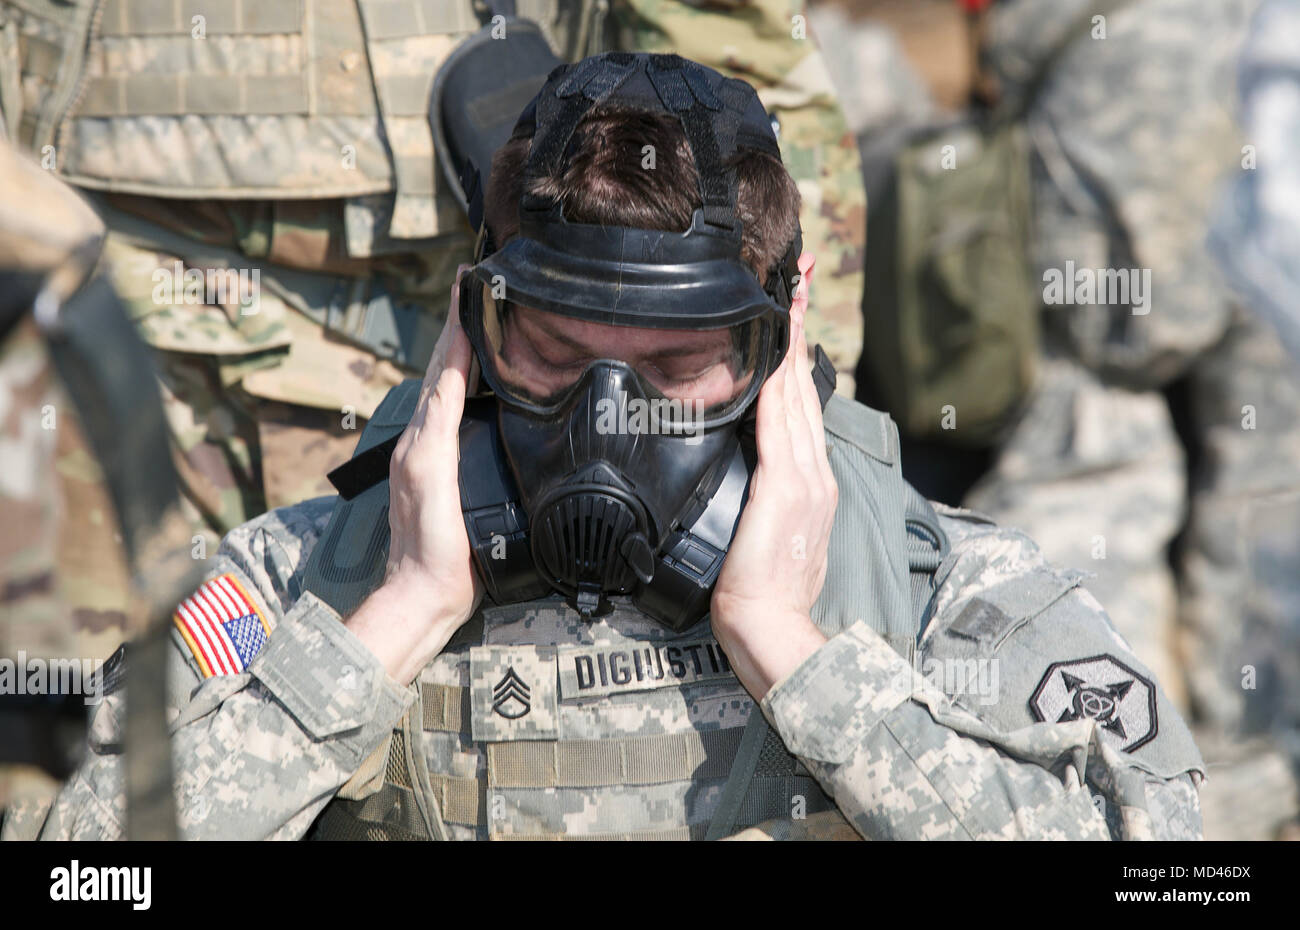 A U.S. Army Reserve Soldier clears an M50, Joint Service General Purpose Mask during chemical, biological, radiological and nuclear defense training at the Combat Support Training Exercise (CSTX) 78-18-03 at Fort Knox, Kentucky, March 15, 2018. CSTX 78-18-03 is a training exercise that ensures America's Army Reserve units and Soldiers are trained and ready to deploy on short-notice and bring capable, combat-ready and lethal firepower in support of the Army and our joint partners anywhere in the world. (U.S. Army Reserve photo by Spc. Torrance Saunders) Stock Photo